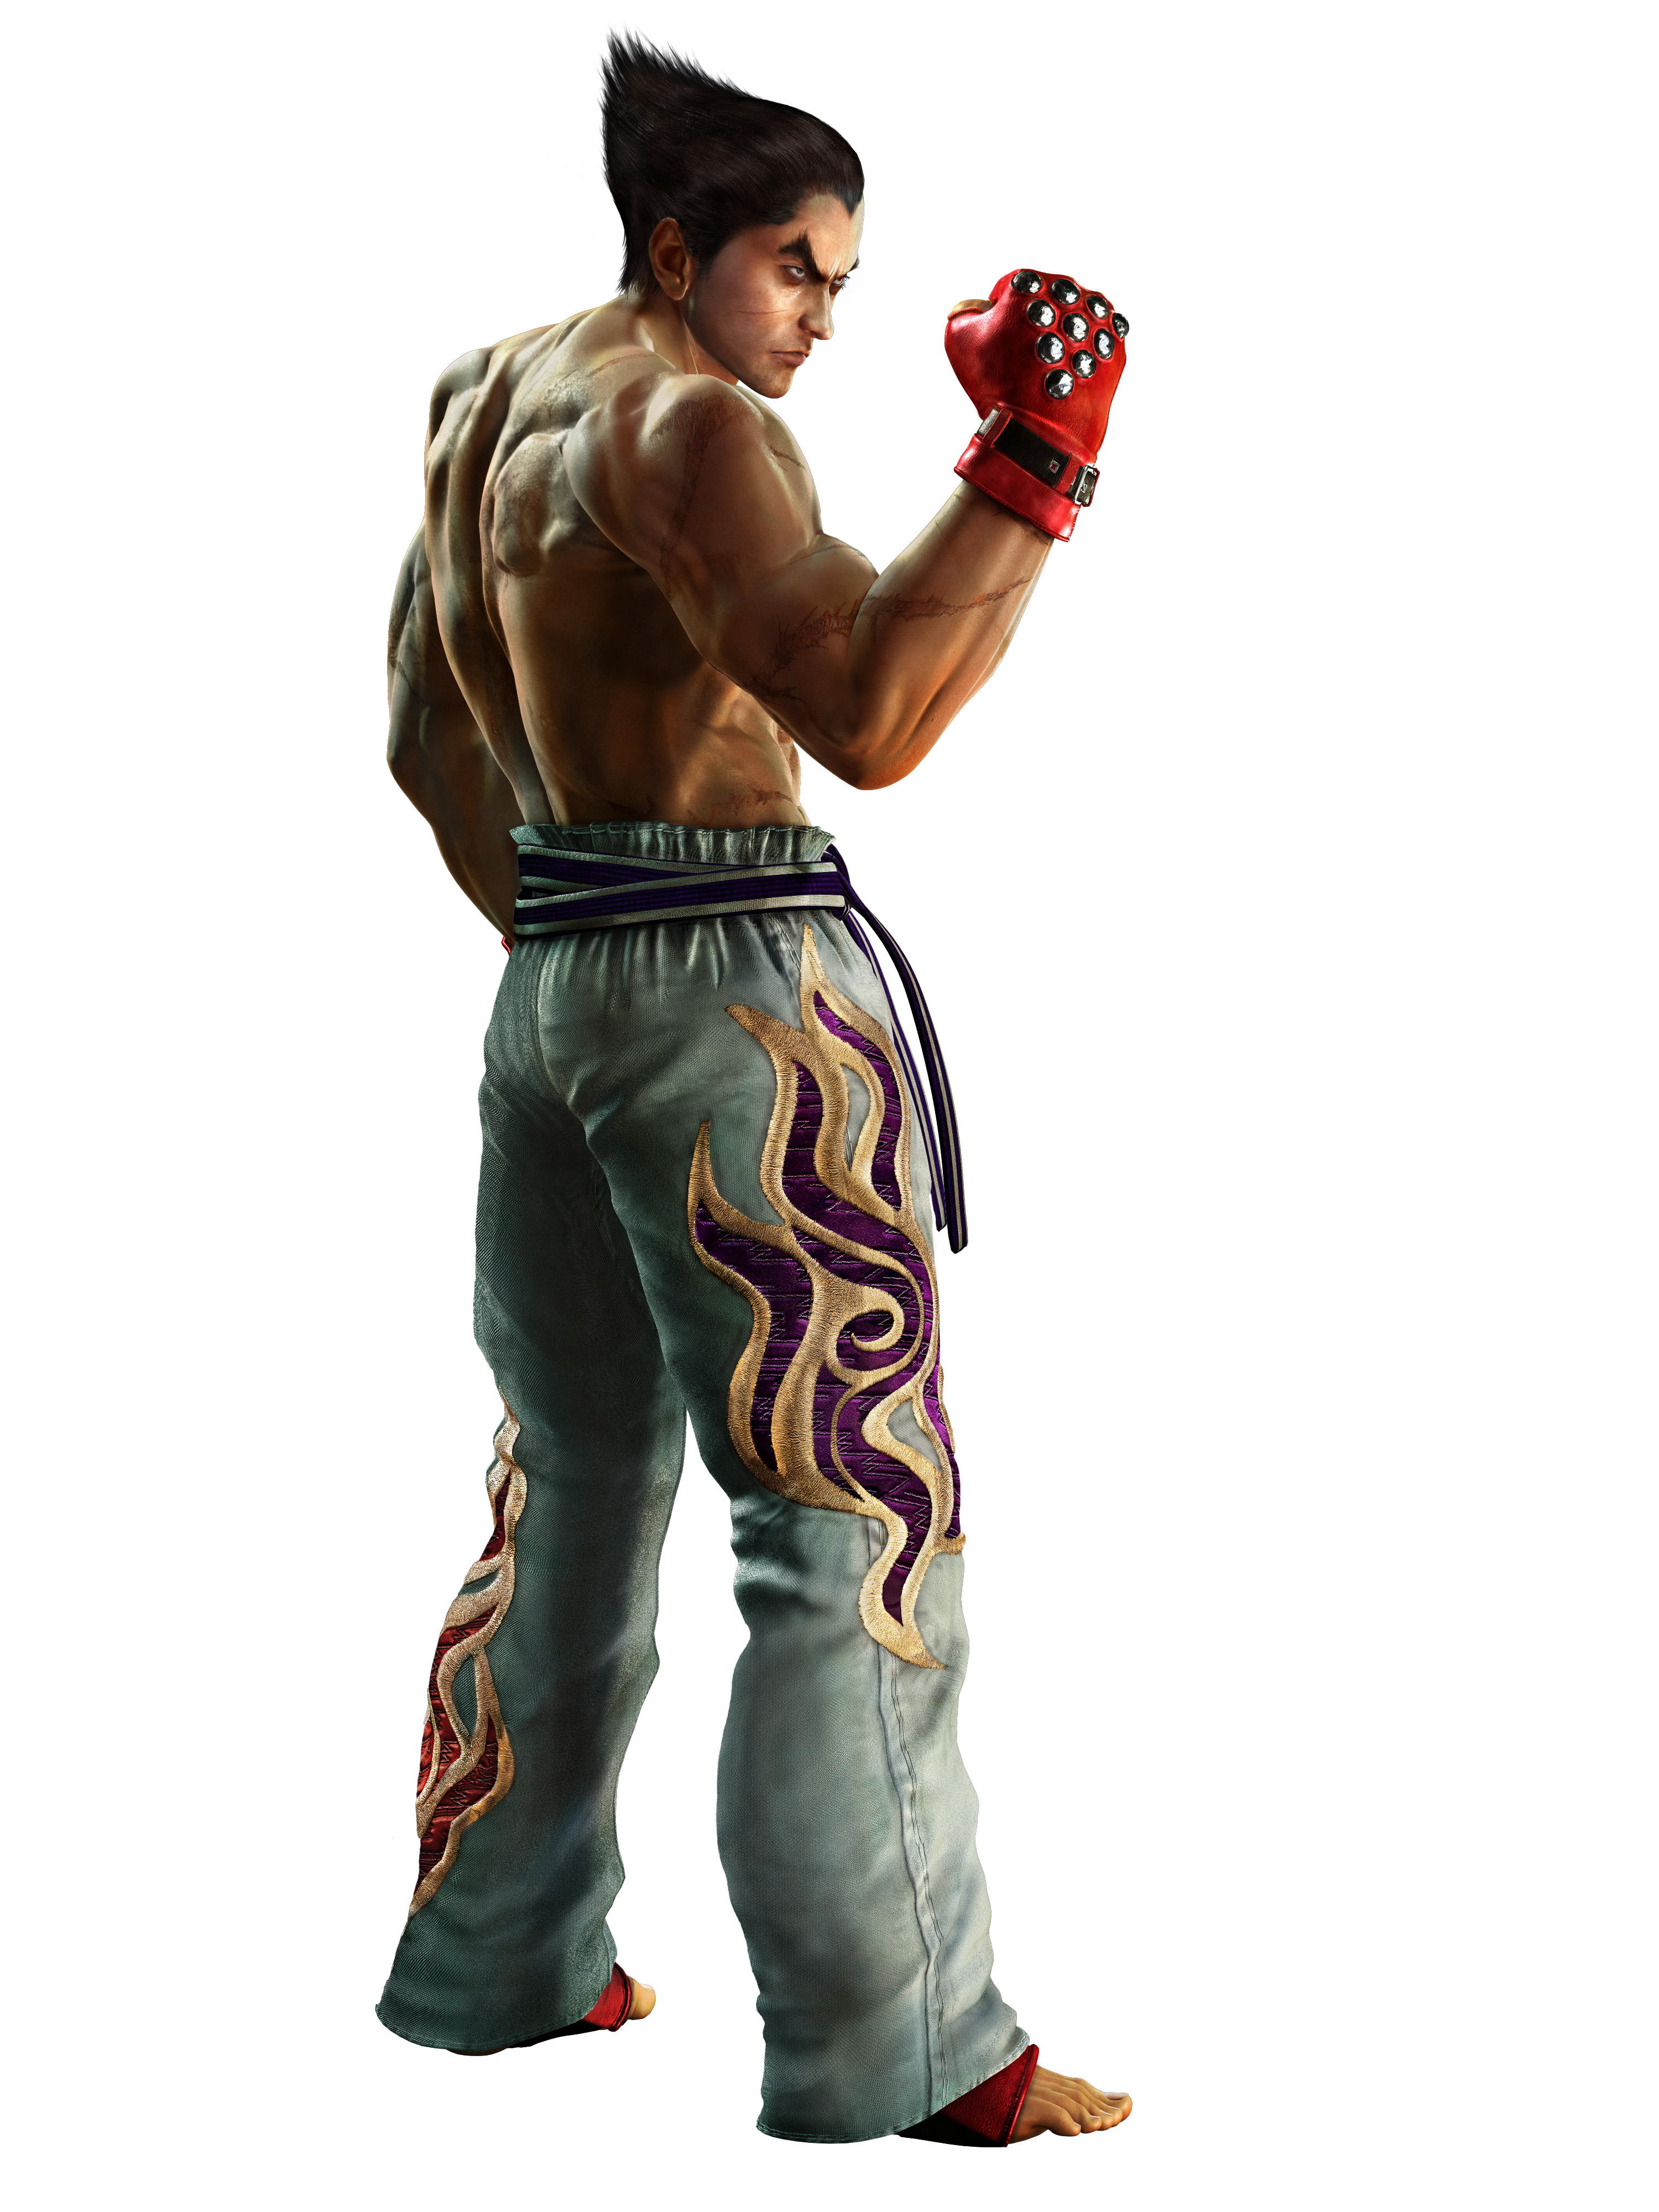 Tekken 5 Picture - Image Abyss